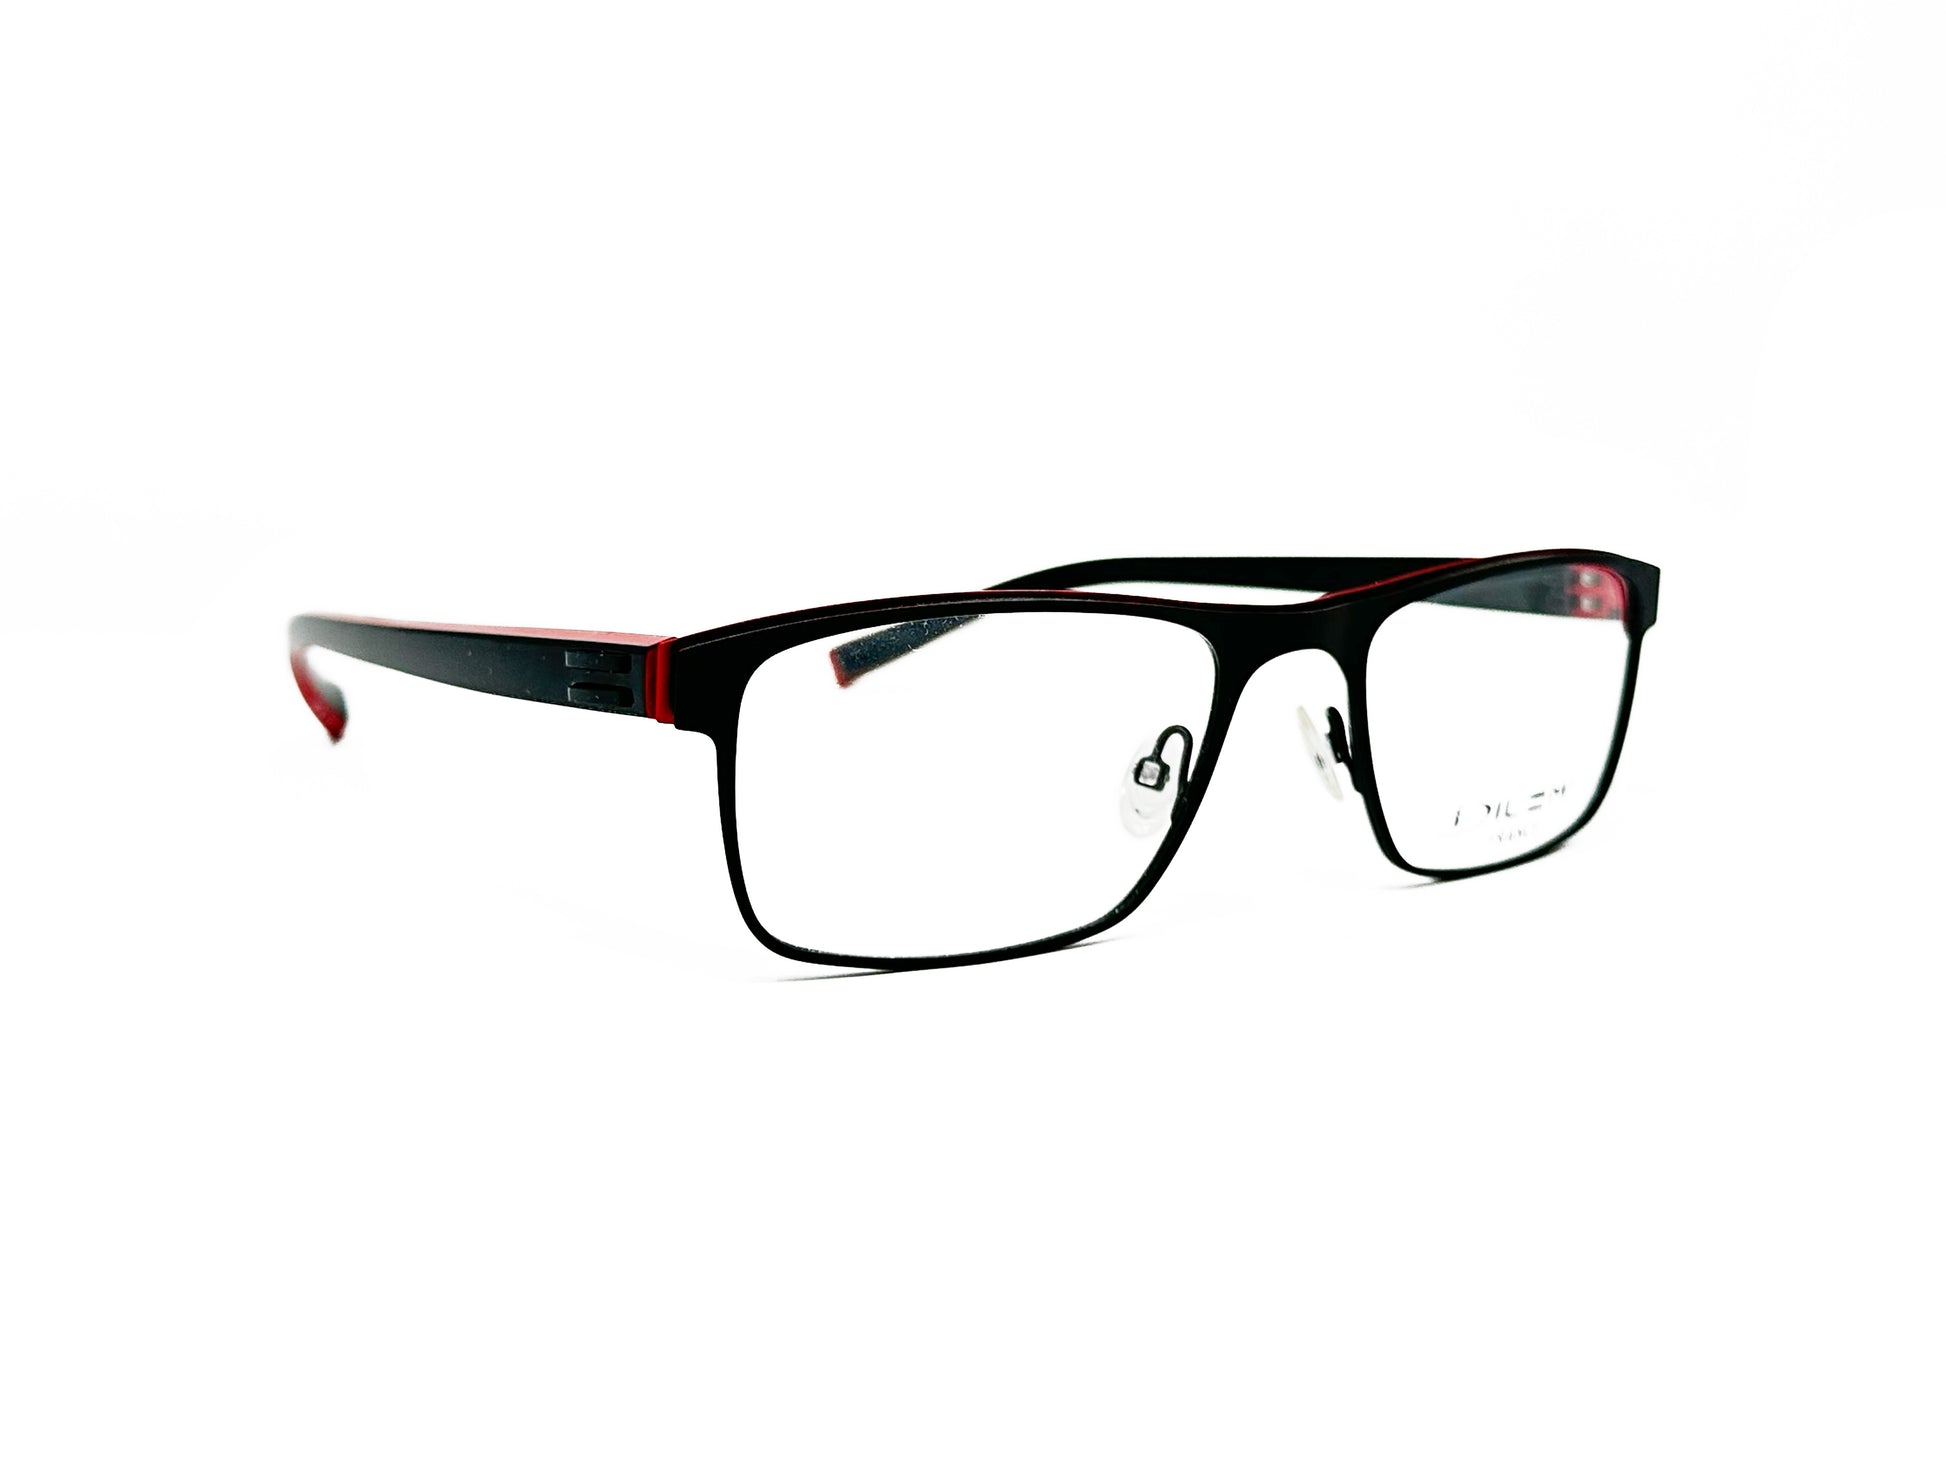 Dilem rectangular metal optical frame. Model: ZB195. Color: 2BB10 - Black with red accent. Side view.